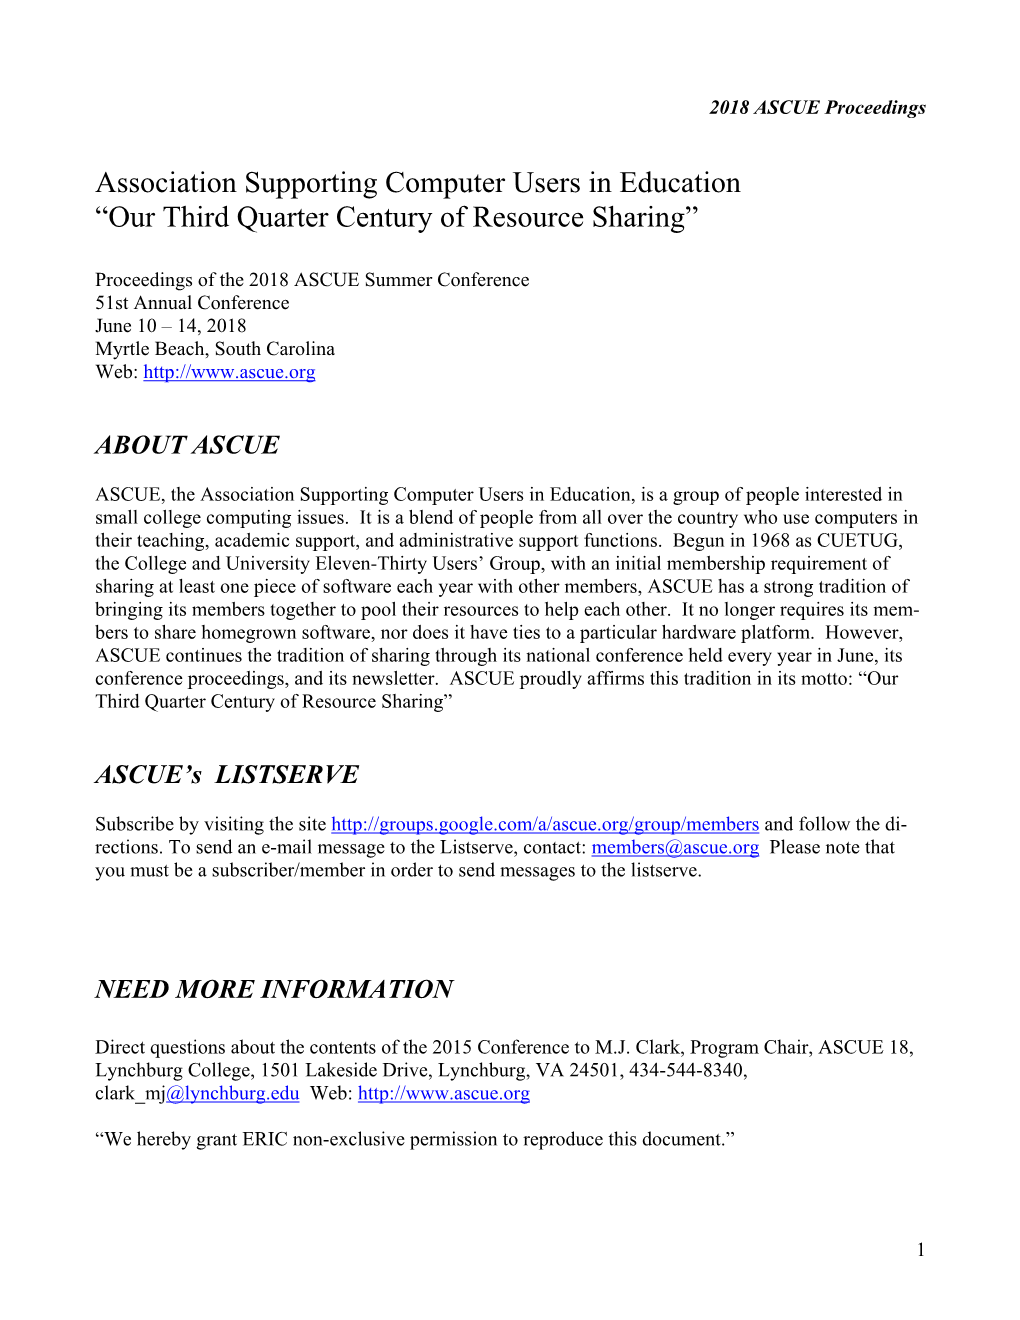 Association Supporting Computer Users in Education “Our Third Quarter Century of Resource Sharing”